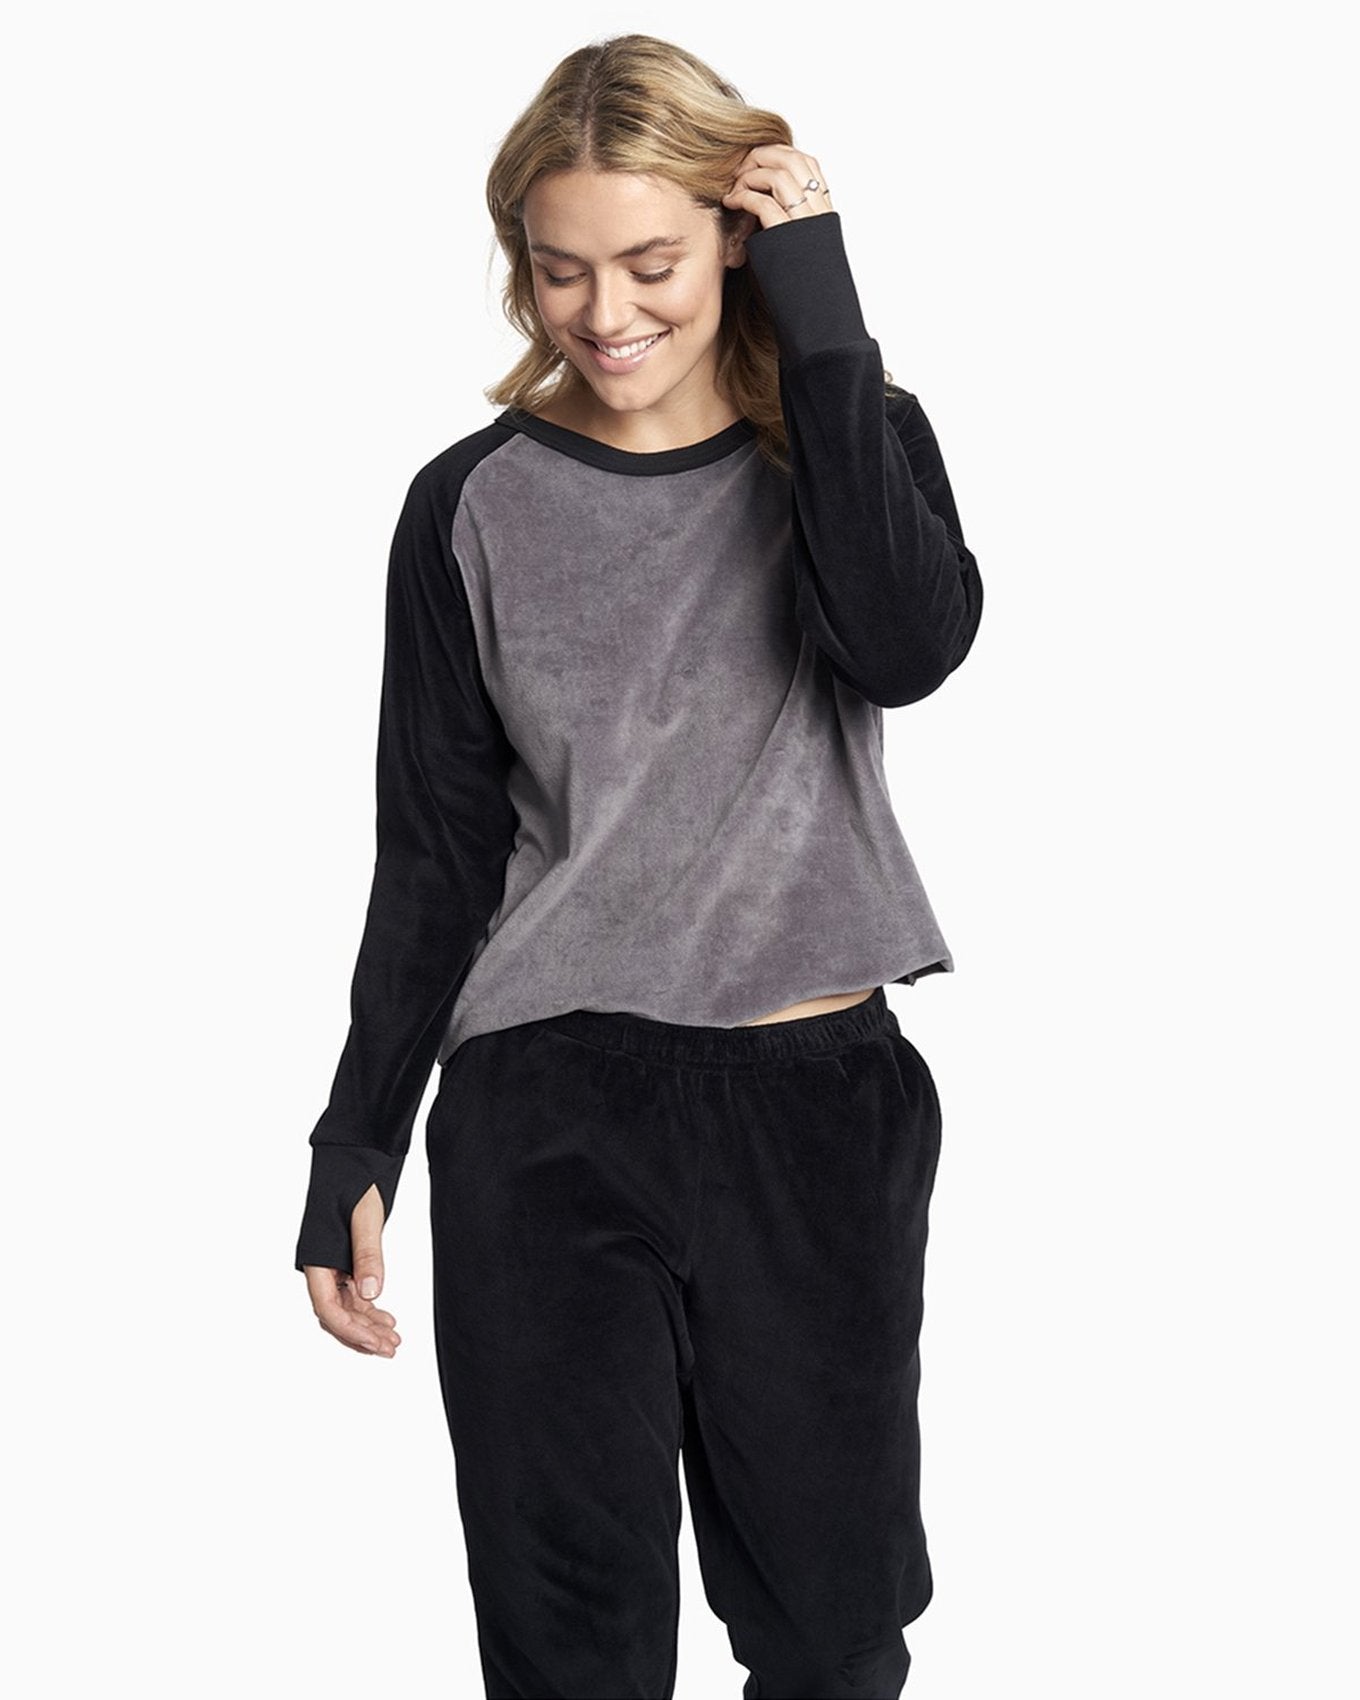 YesAnd Organic Velour Jogger Jogger in color Jet Black and shape jogger/sweatpant